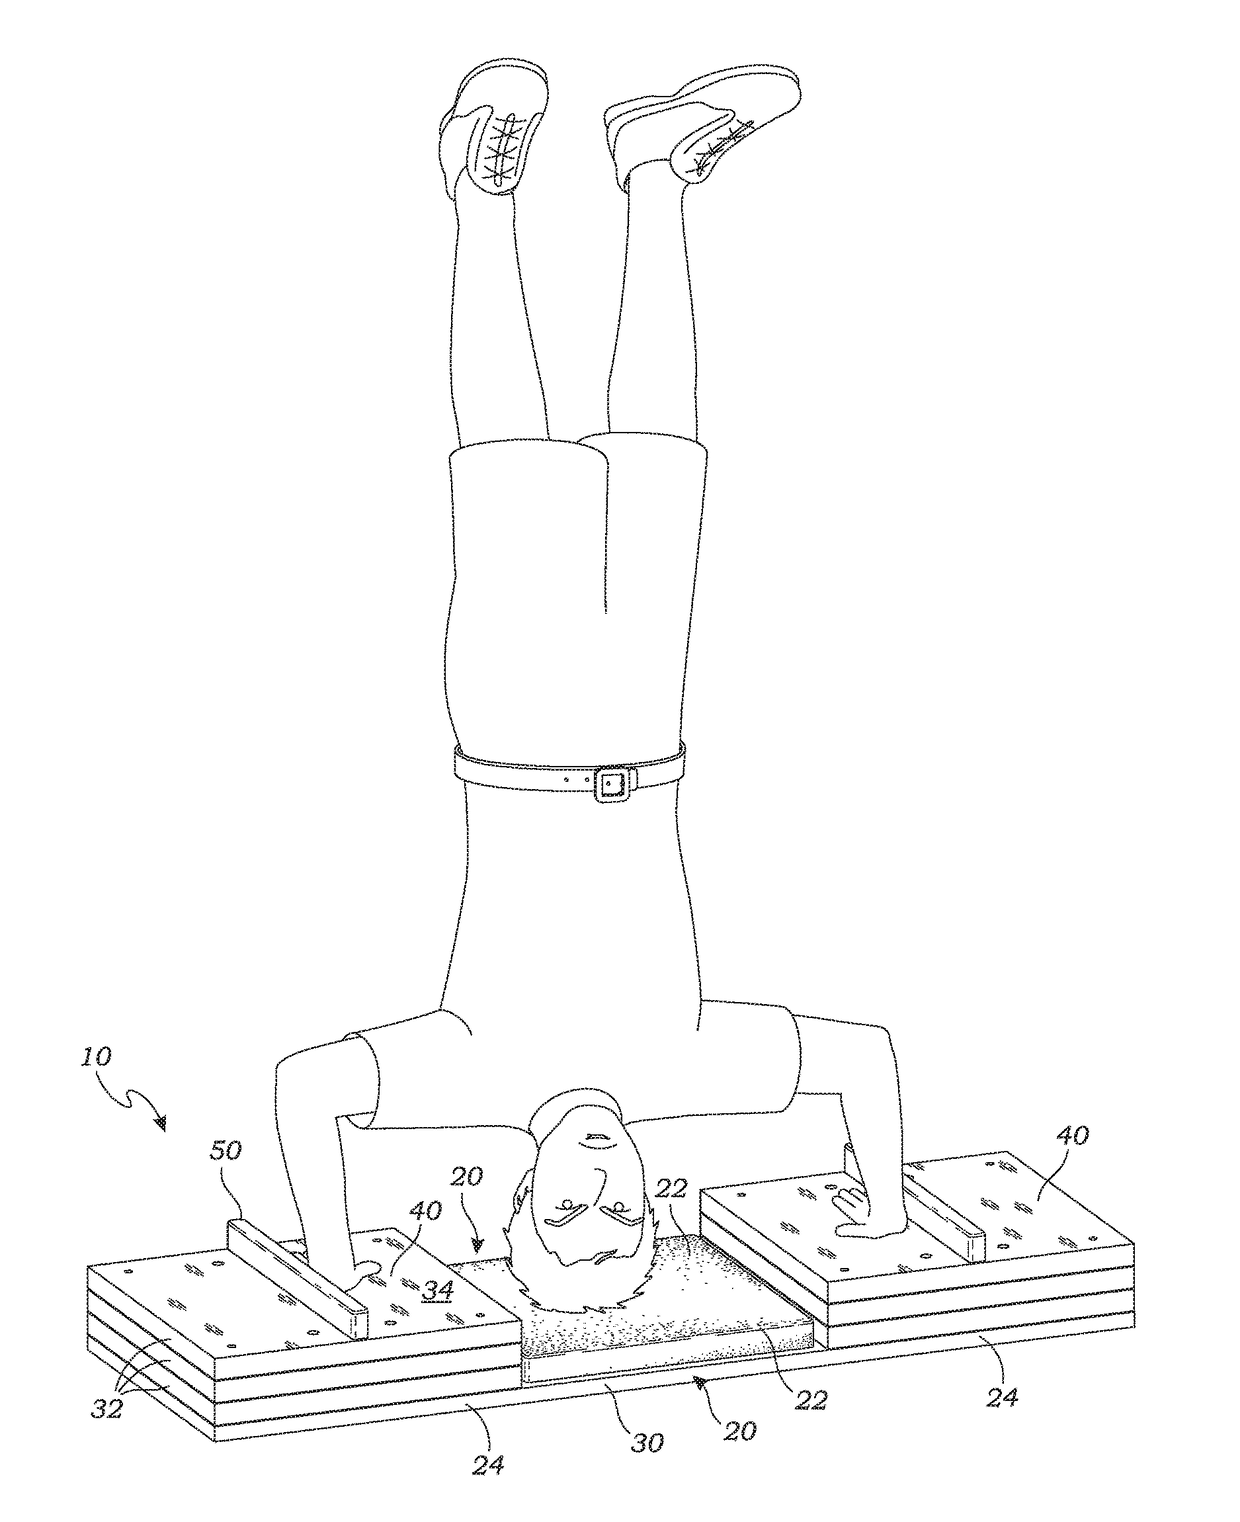 Handstand pushup device